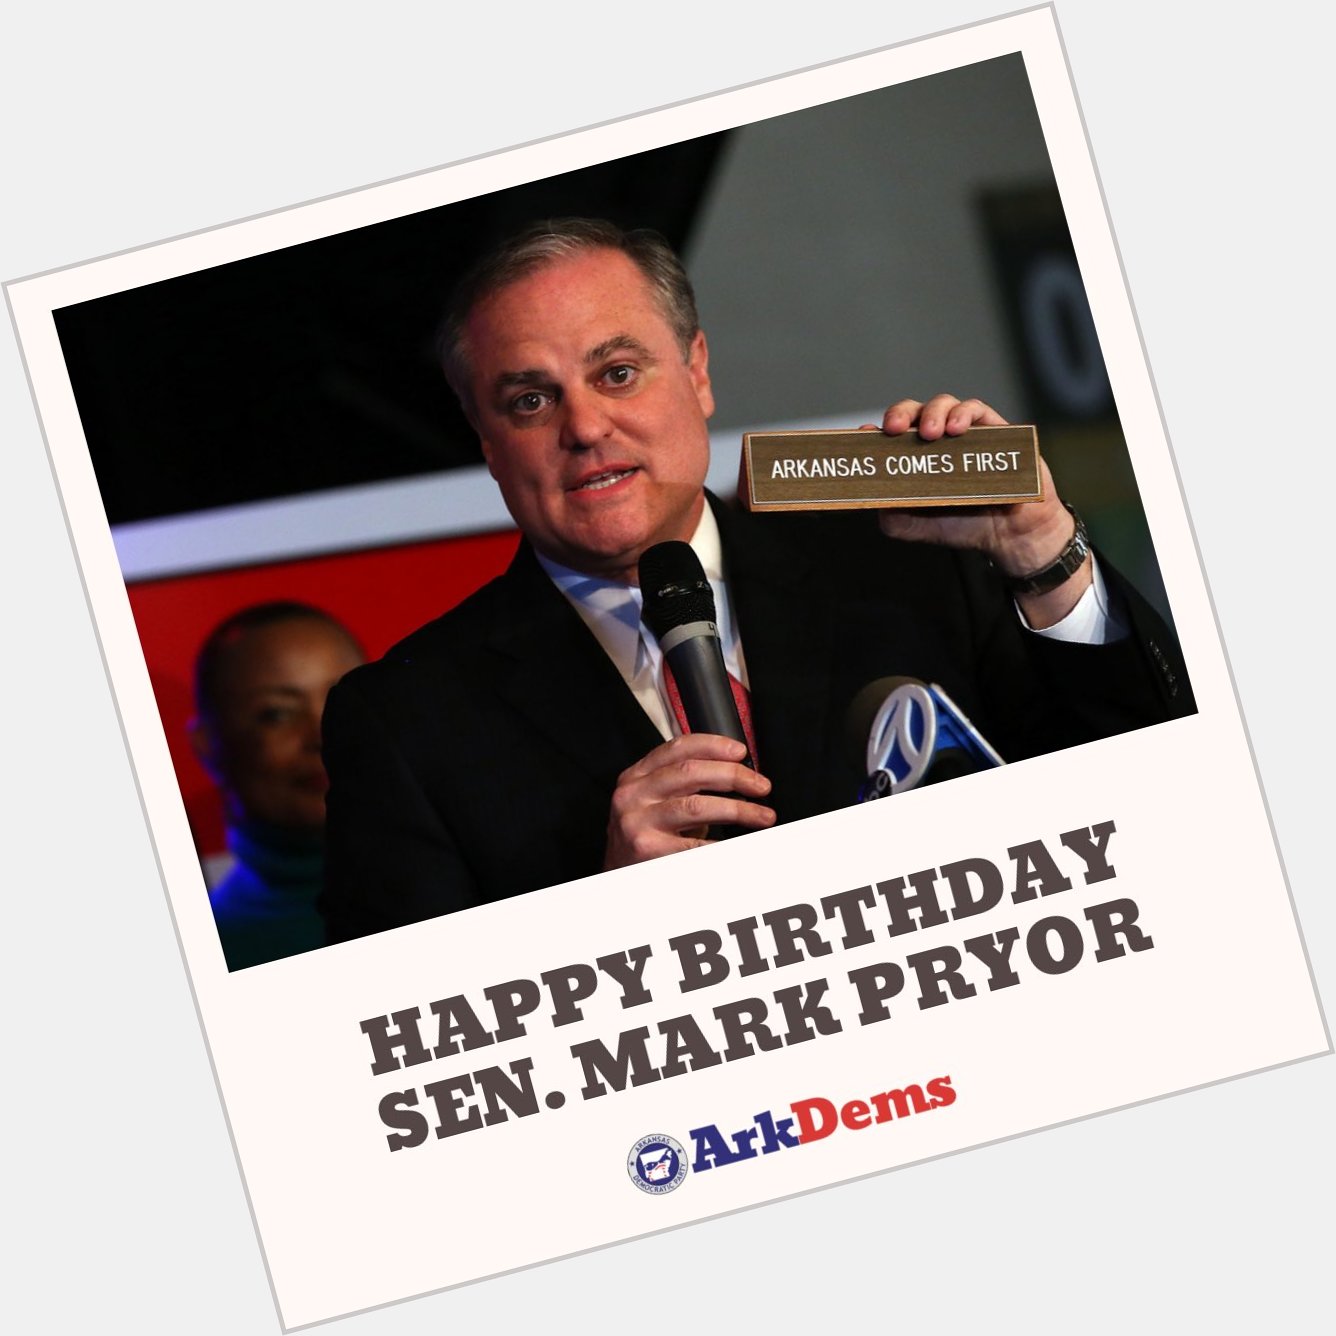  Happy birthday to Sen. Mark Pryor! Our state and our nation appreciate your service. Arkansas Comes First! 